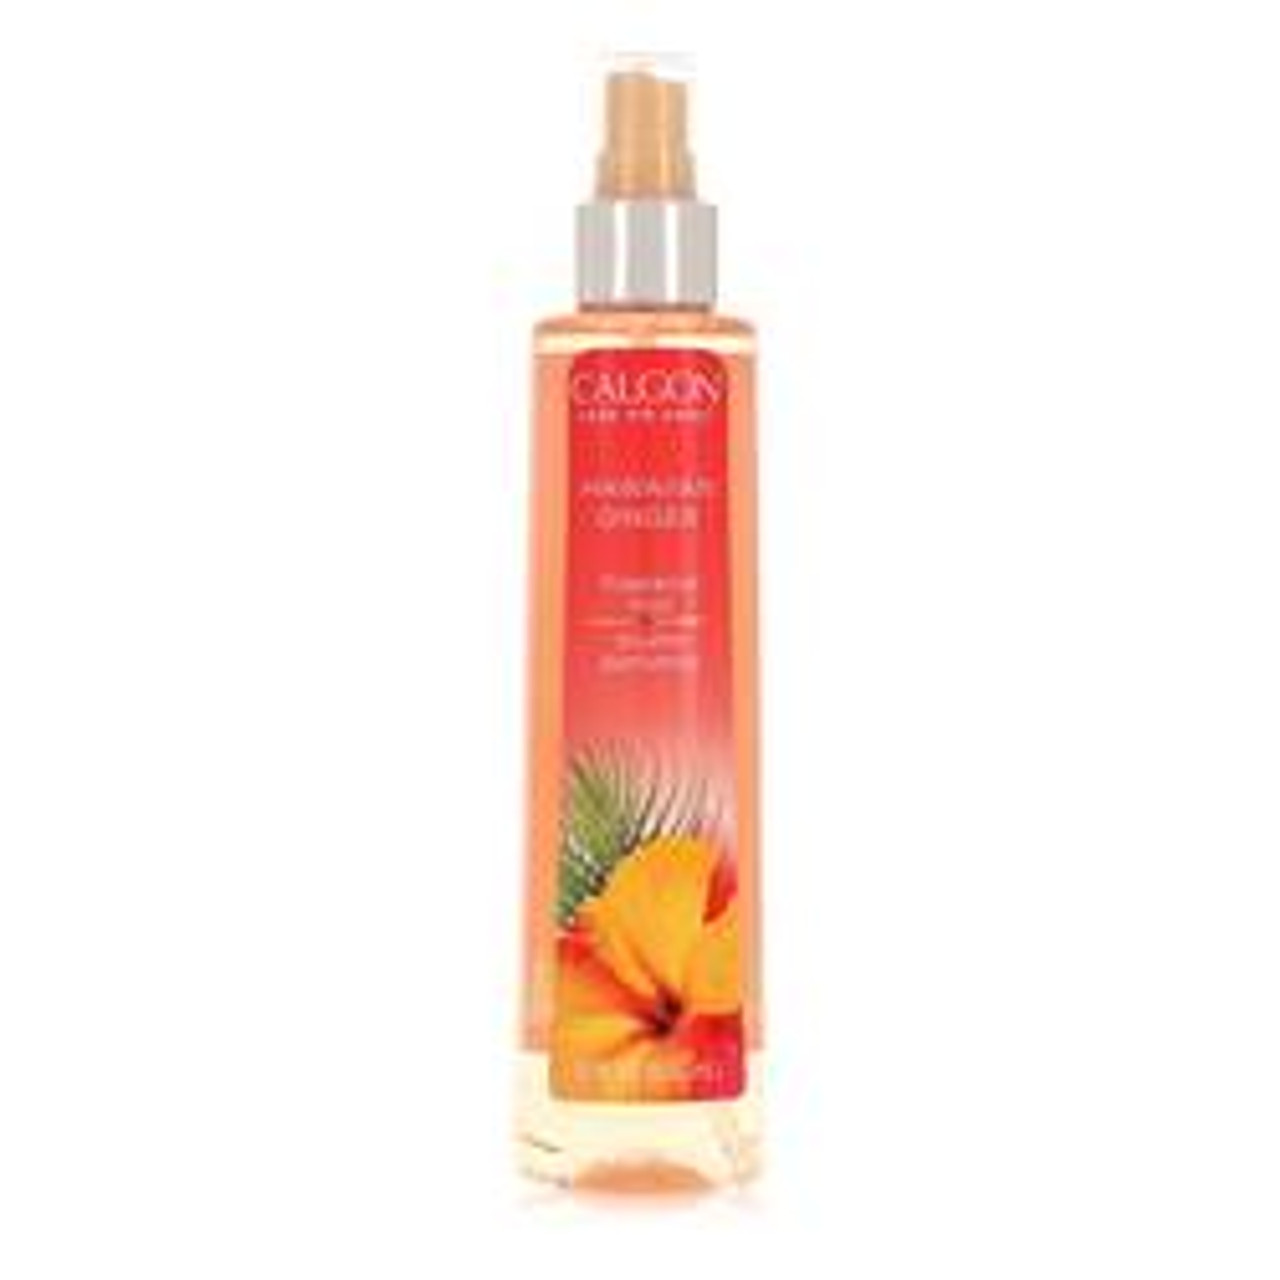 Calgon Take Me Away Hawaiian Ginger Perfume By Calgon Body Mist 8 oz for Women - [From 23.00 - Choose pk Qty ] - *Ships from Miami